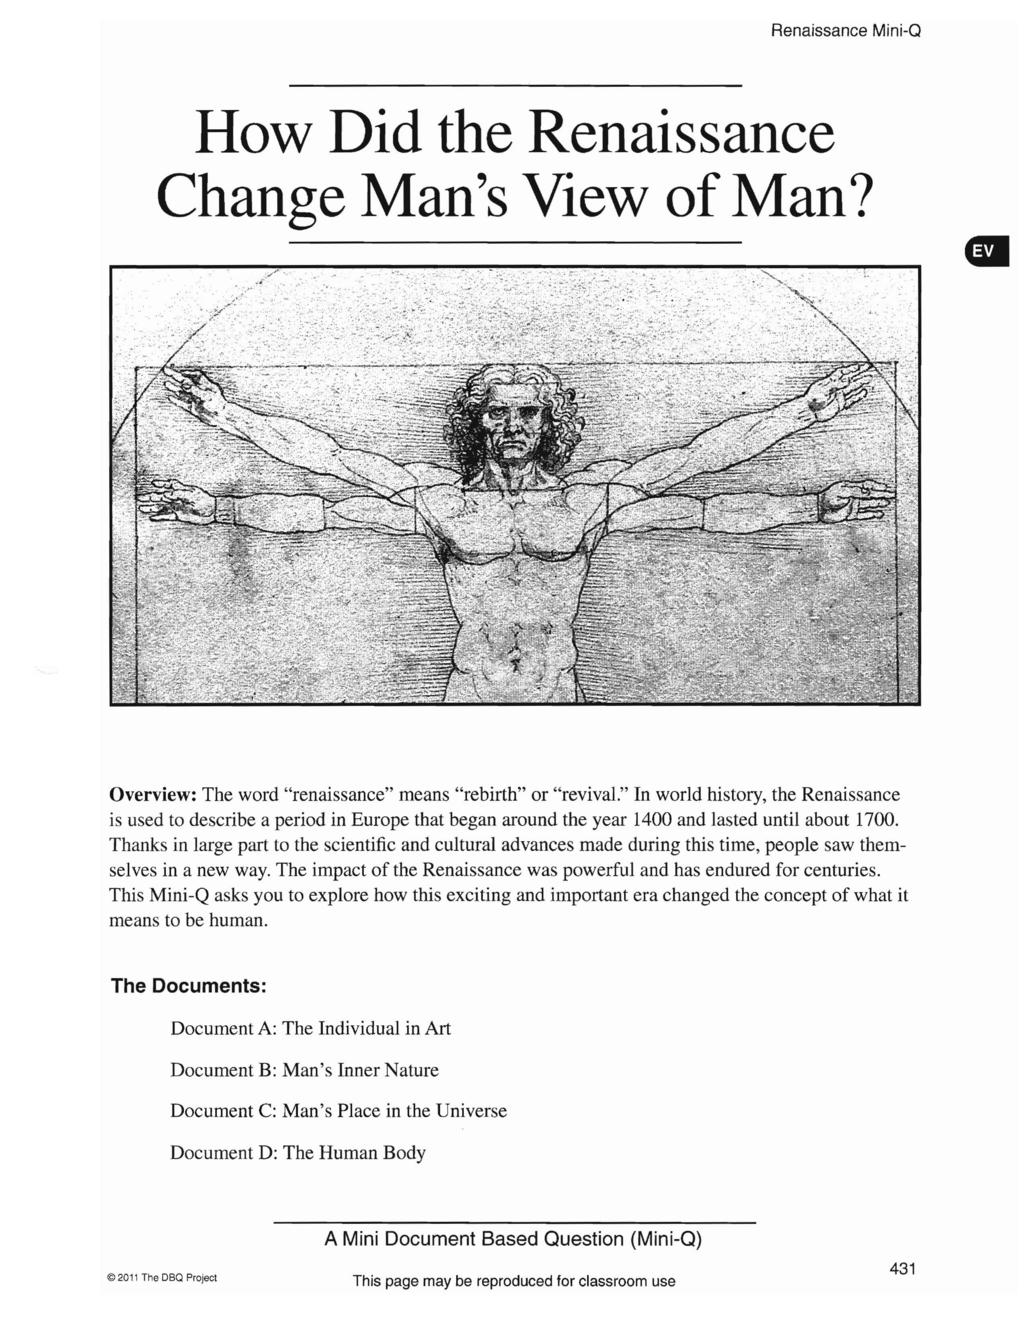 How Did the Renaissance Change Man's View of Man? Overview: The word "renaissance" means "rebirth" or "revival.